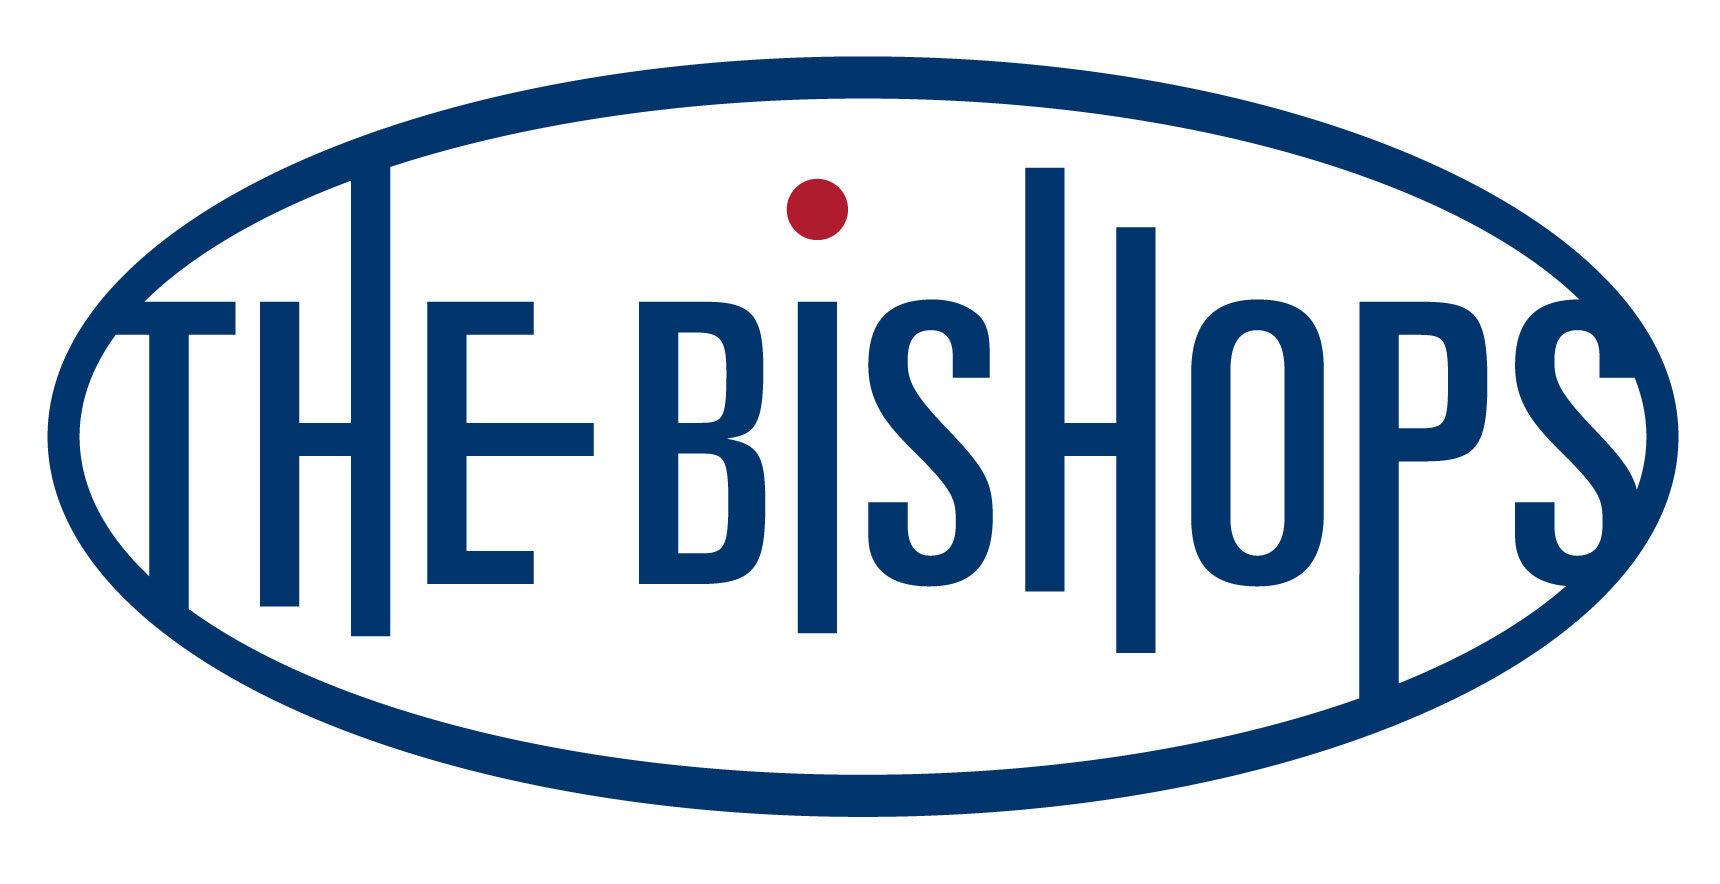 The Bishops